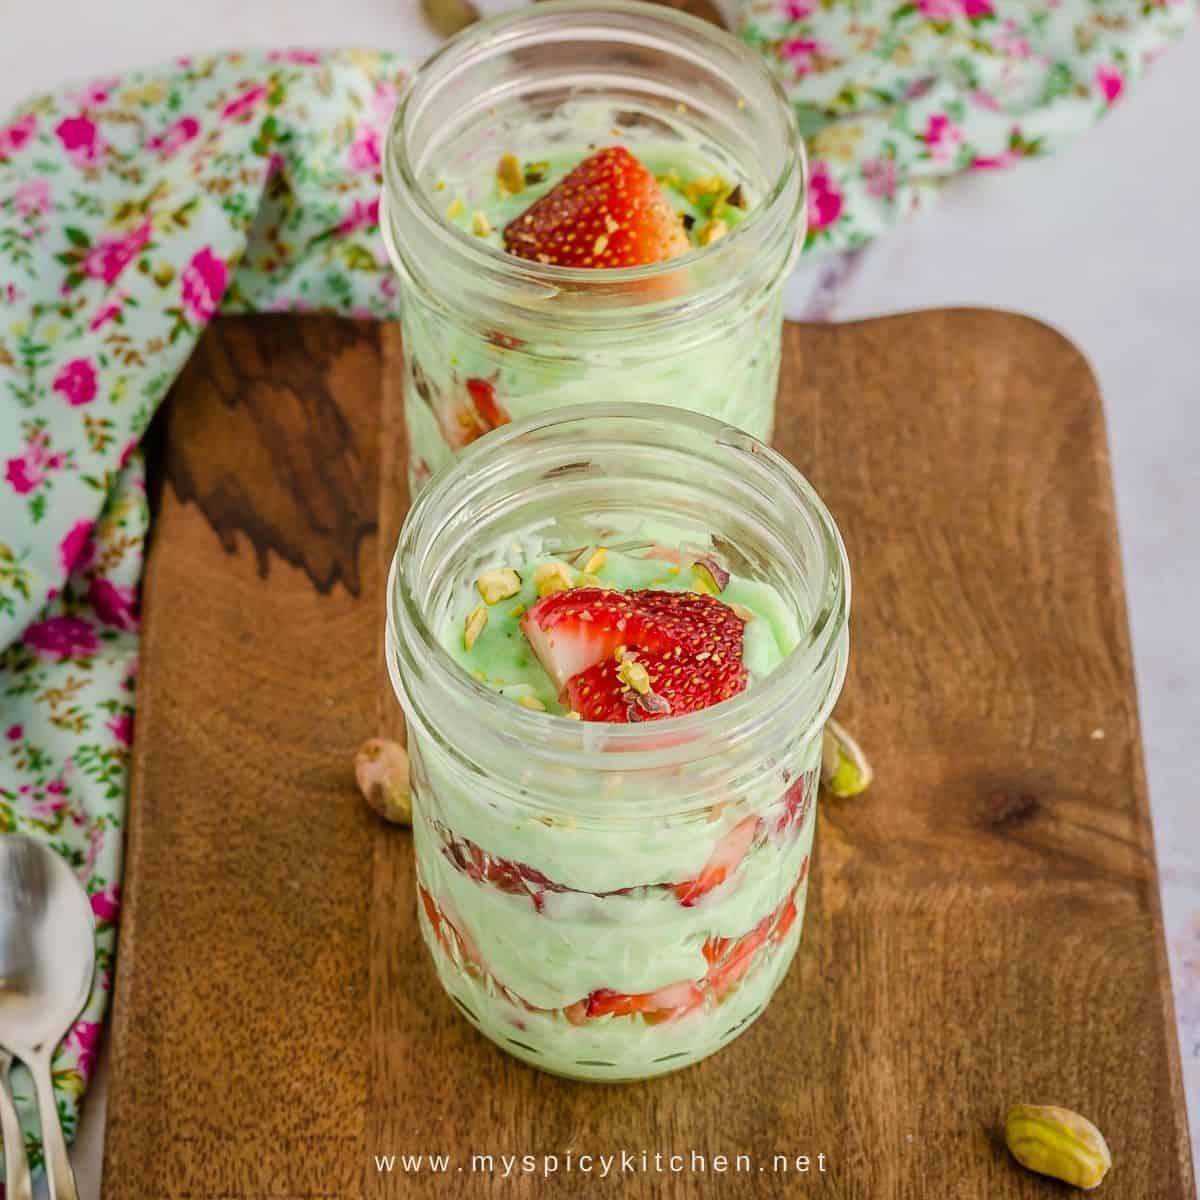 Two jars filled with layers of pistachio pudding and chopped strawberries on a wooden board.